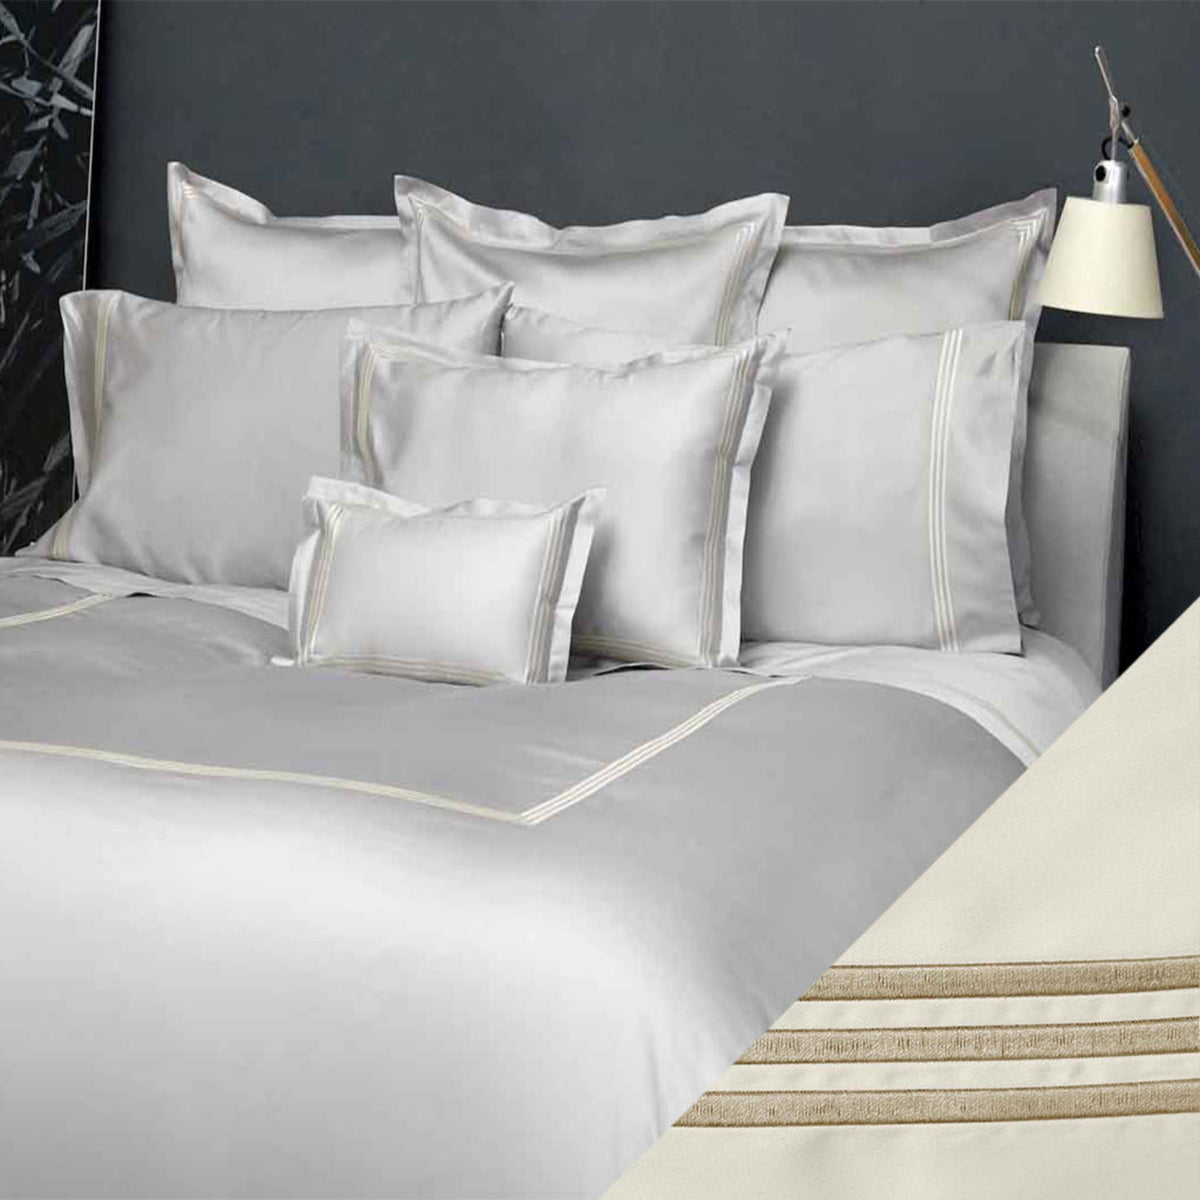 Full Bed Dressed in Signoria Platinum Sateen Bedding with Ivory/Taupe Swatch